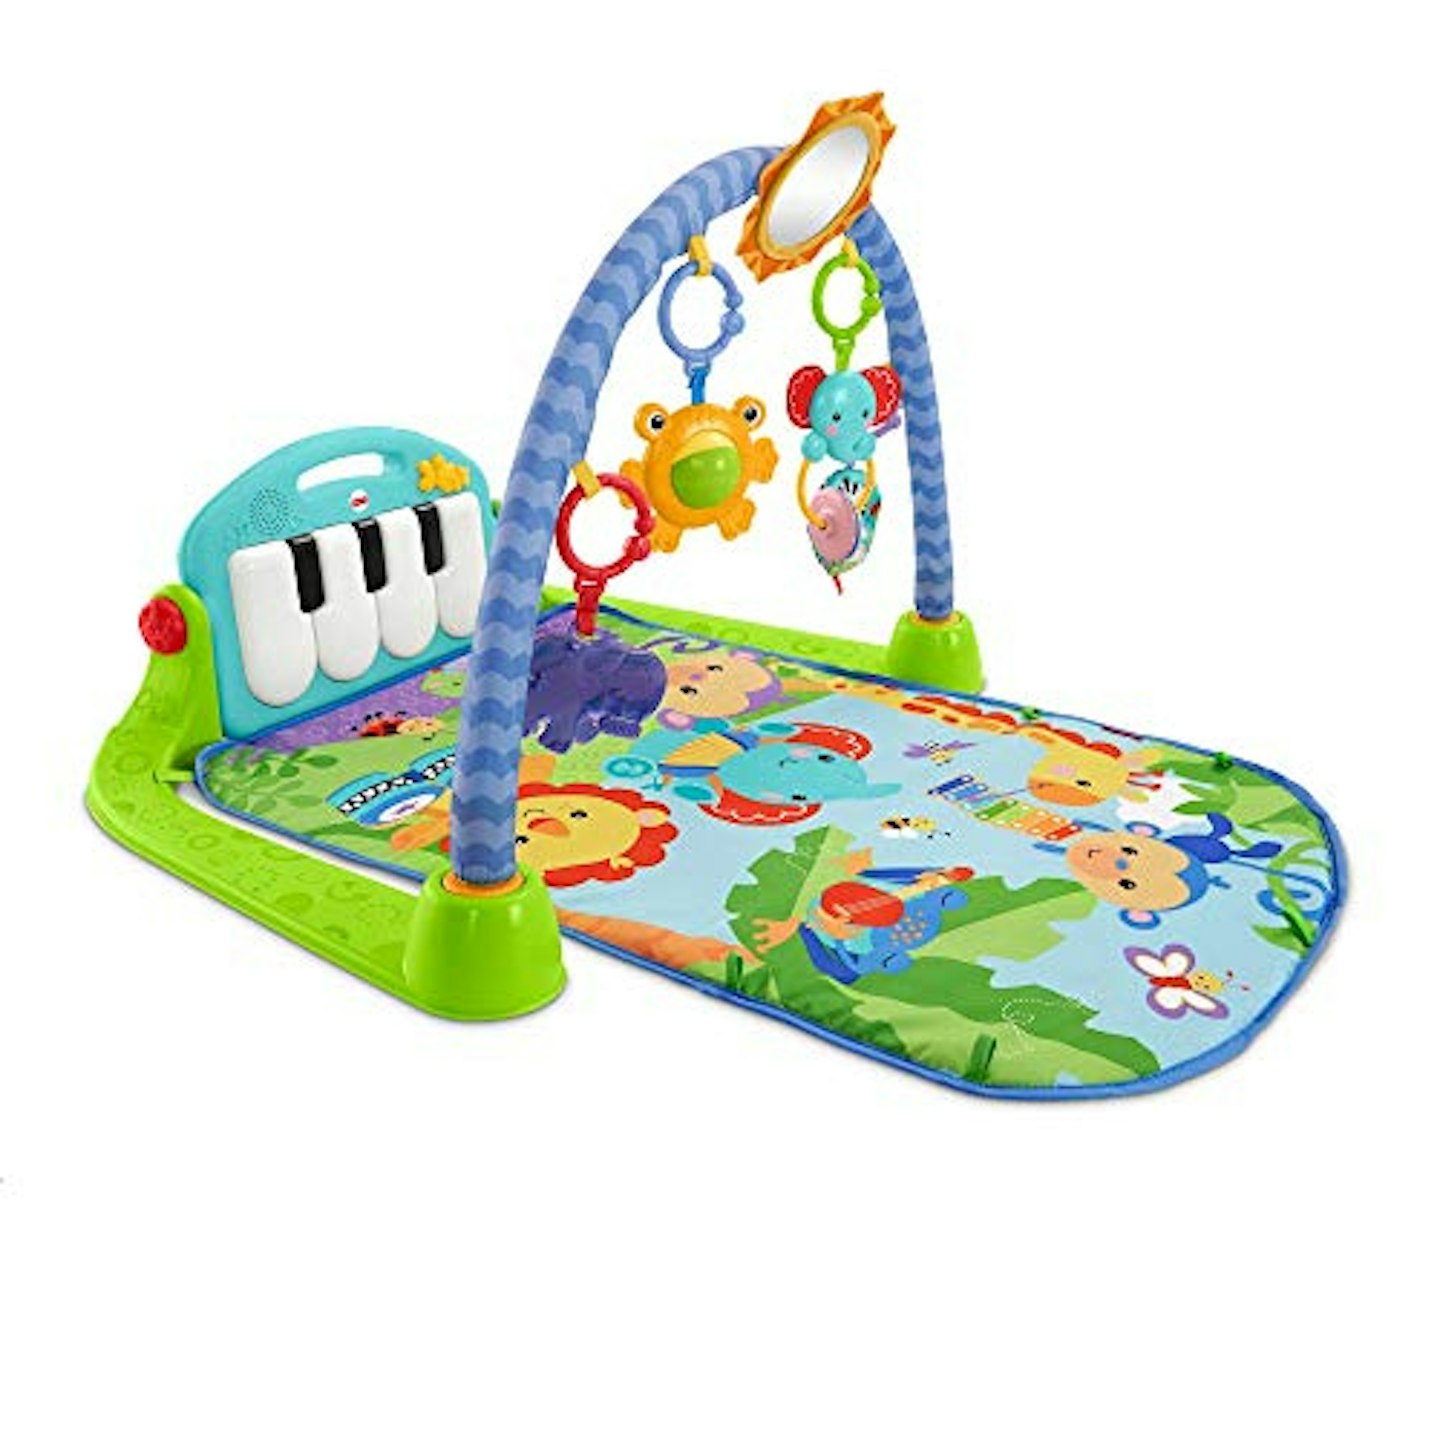 Tummy time toys - Kick and play piano gym